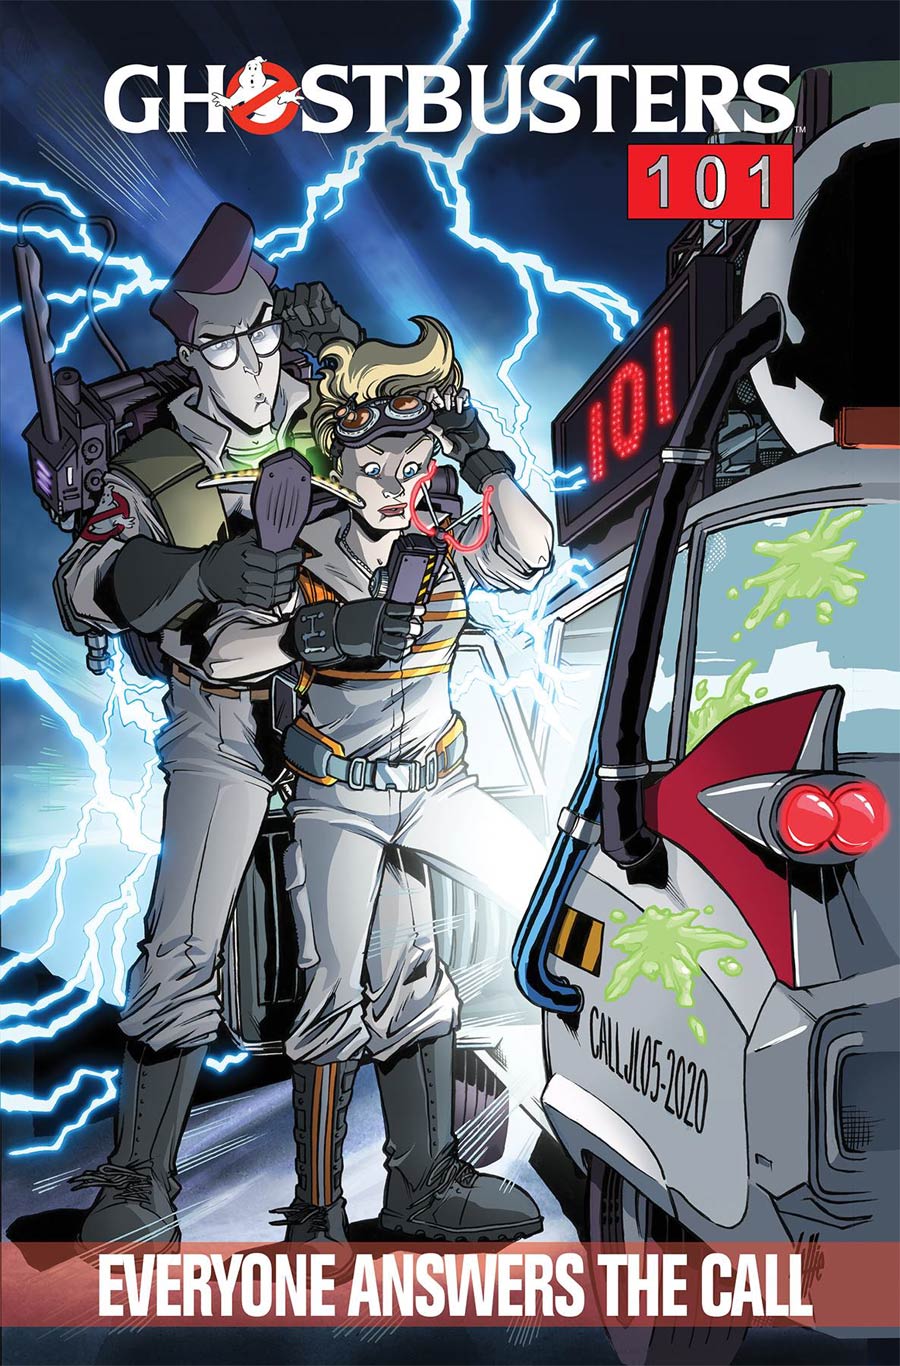 Ghostbusters 101 Everyone Answers The Call TP